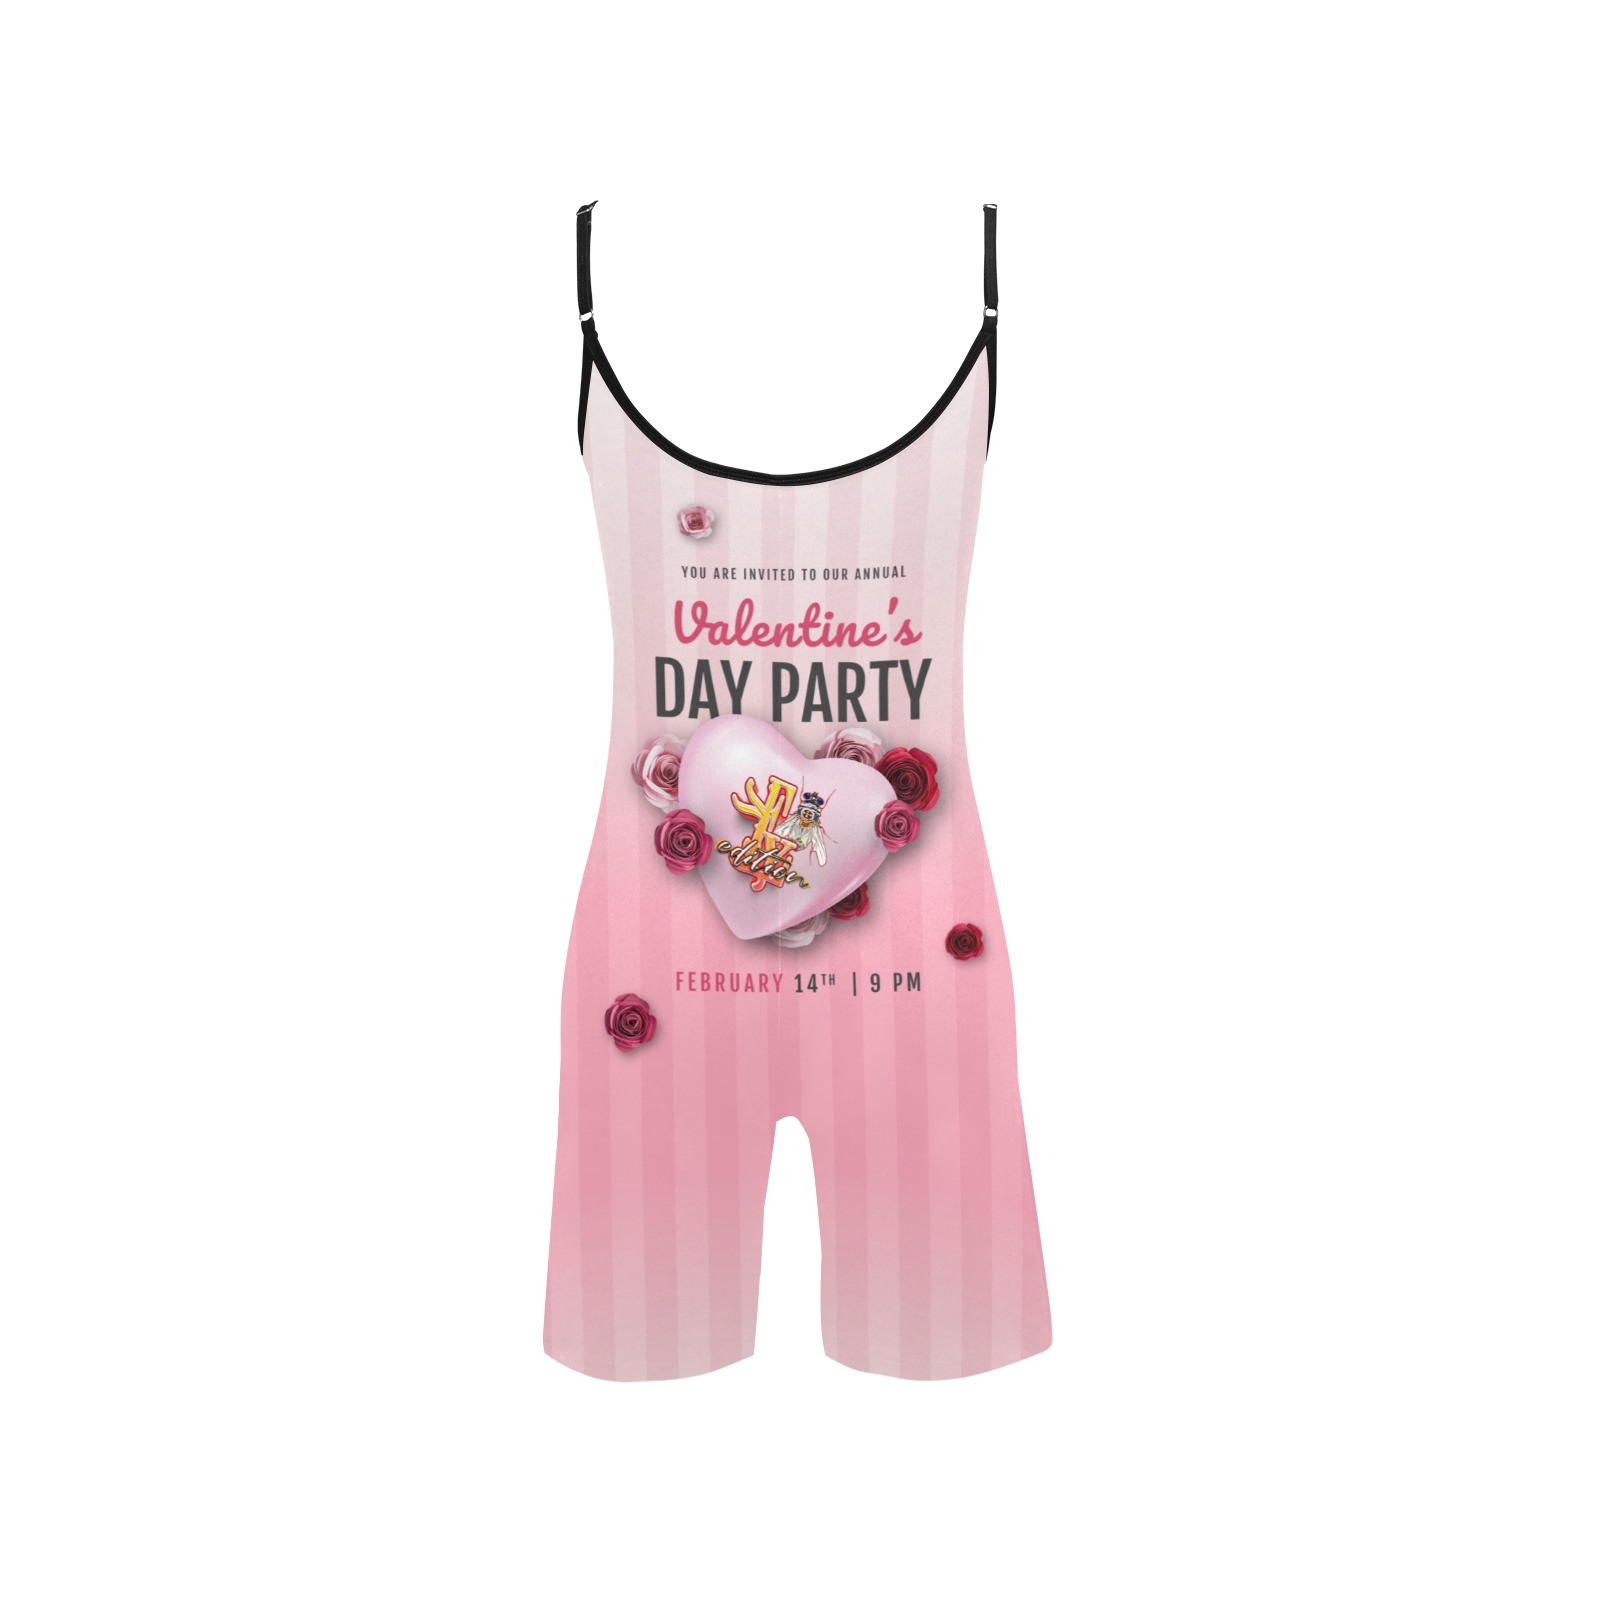 Valentines Day Party Collectable Fly Women's Short Yoga Bodysuit